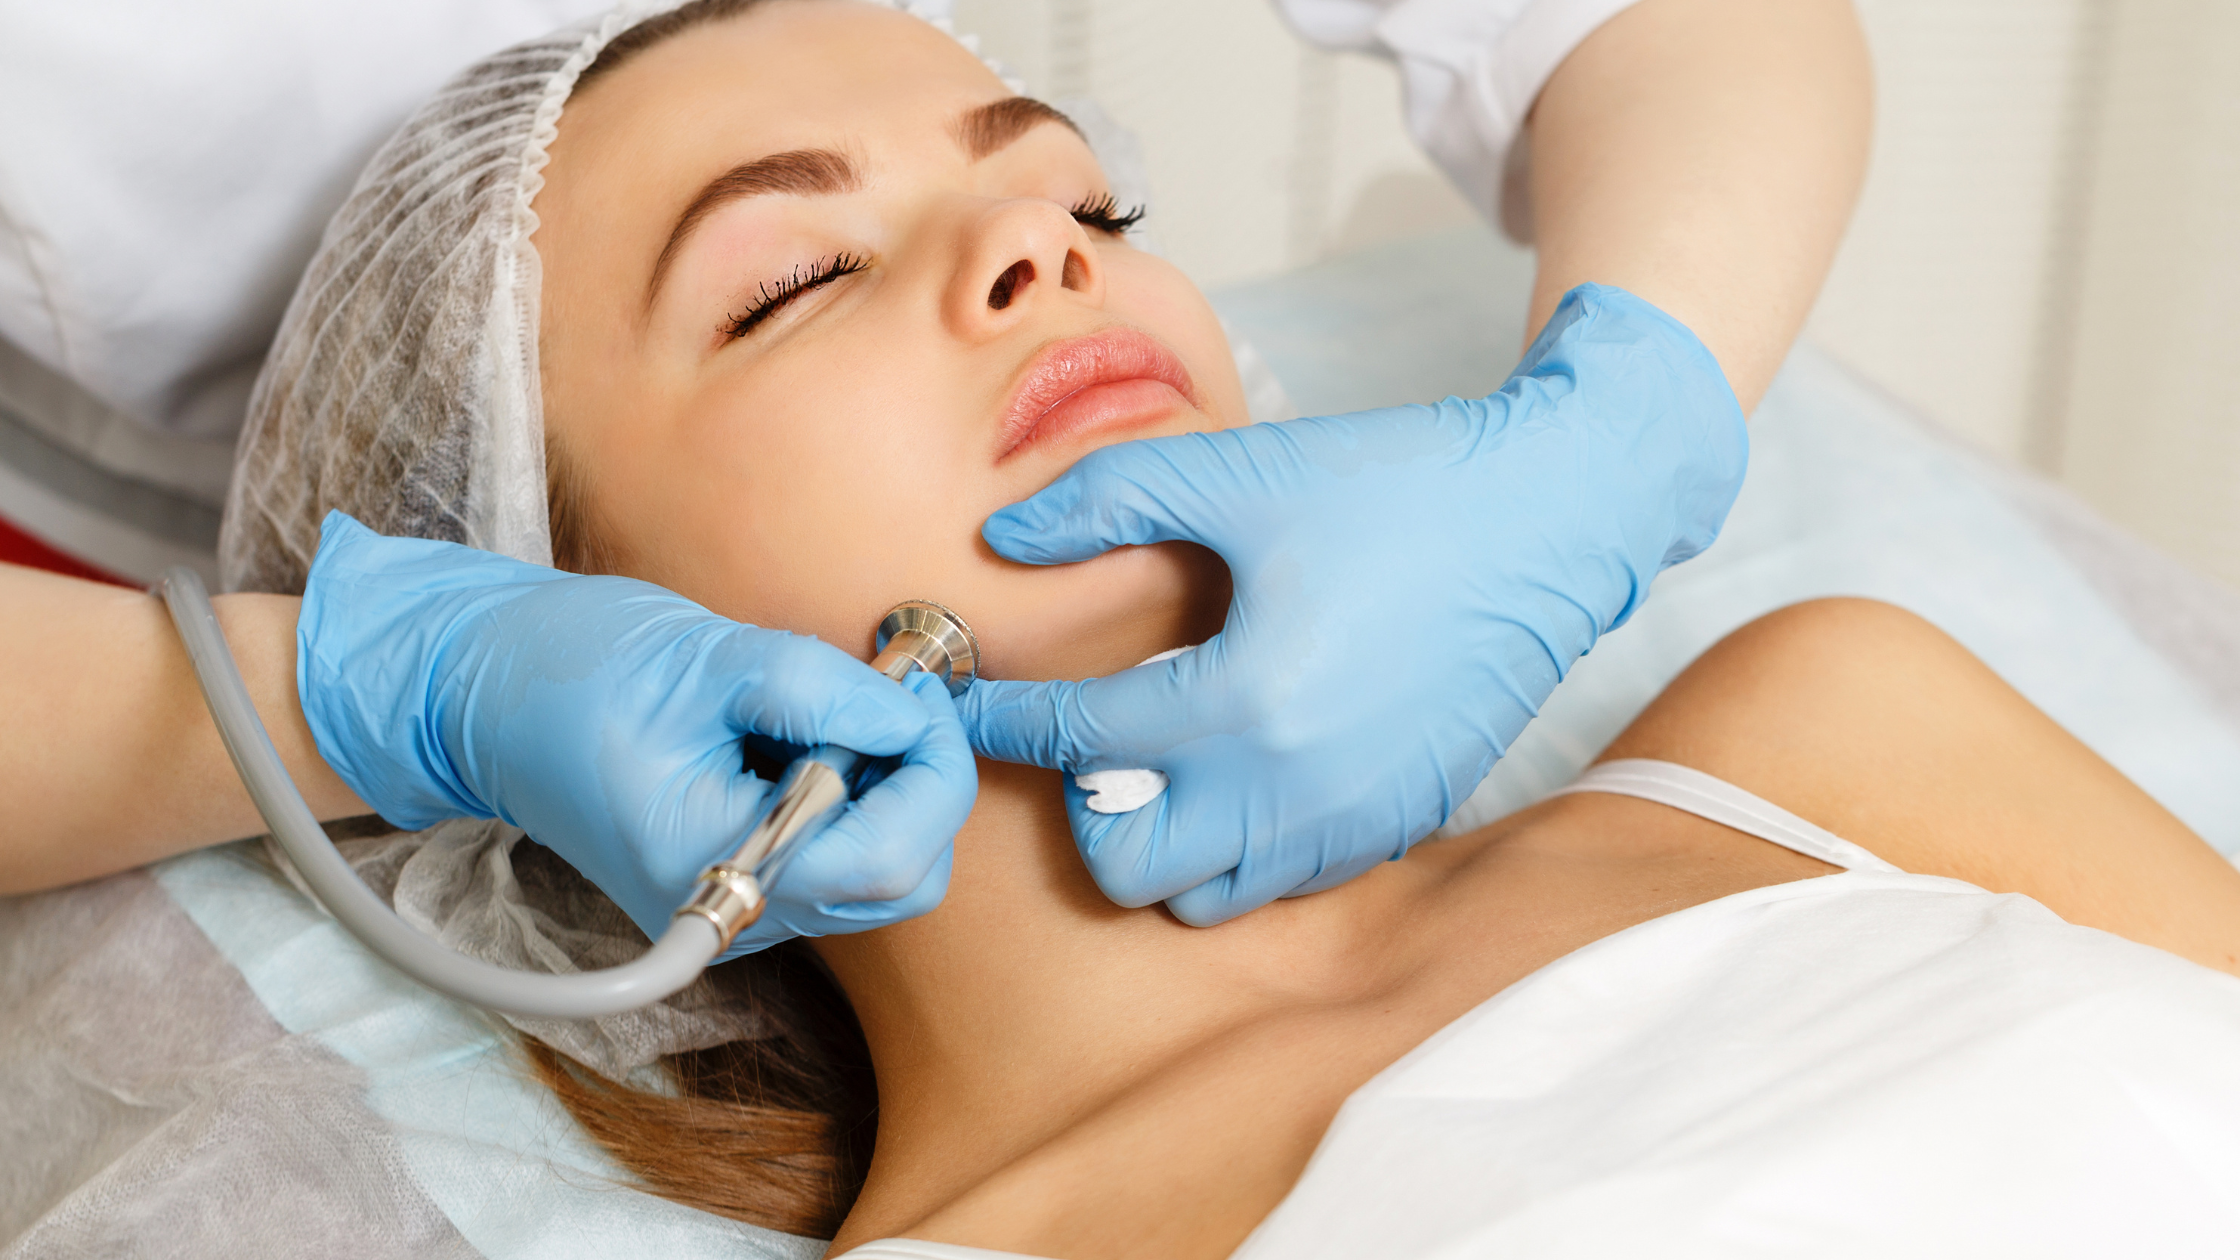 Microdermabrasion Facial Services